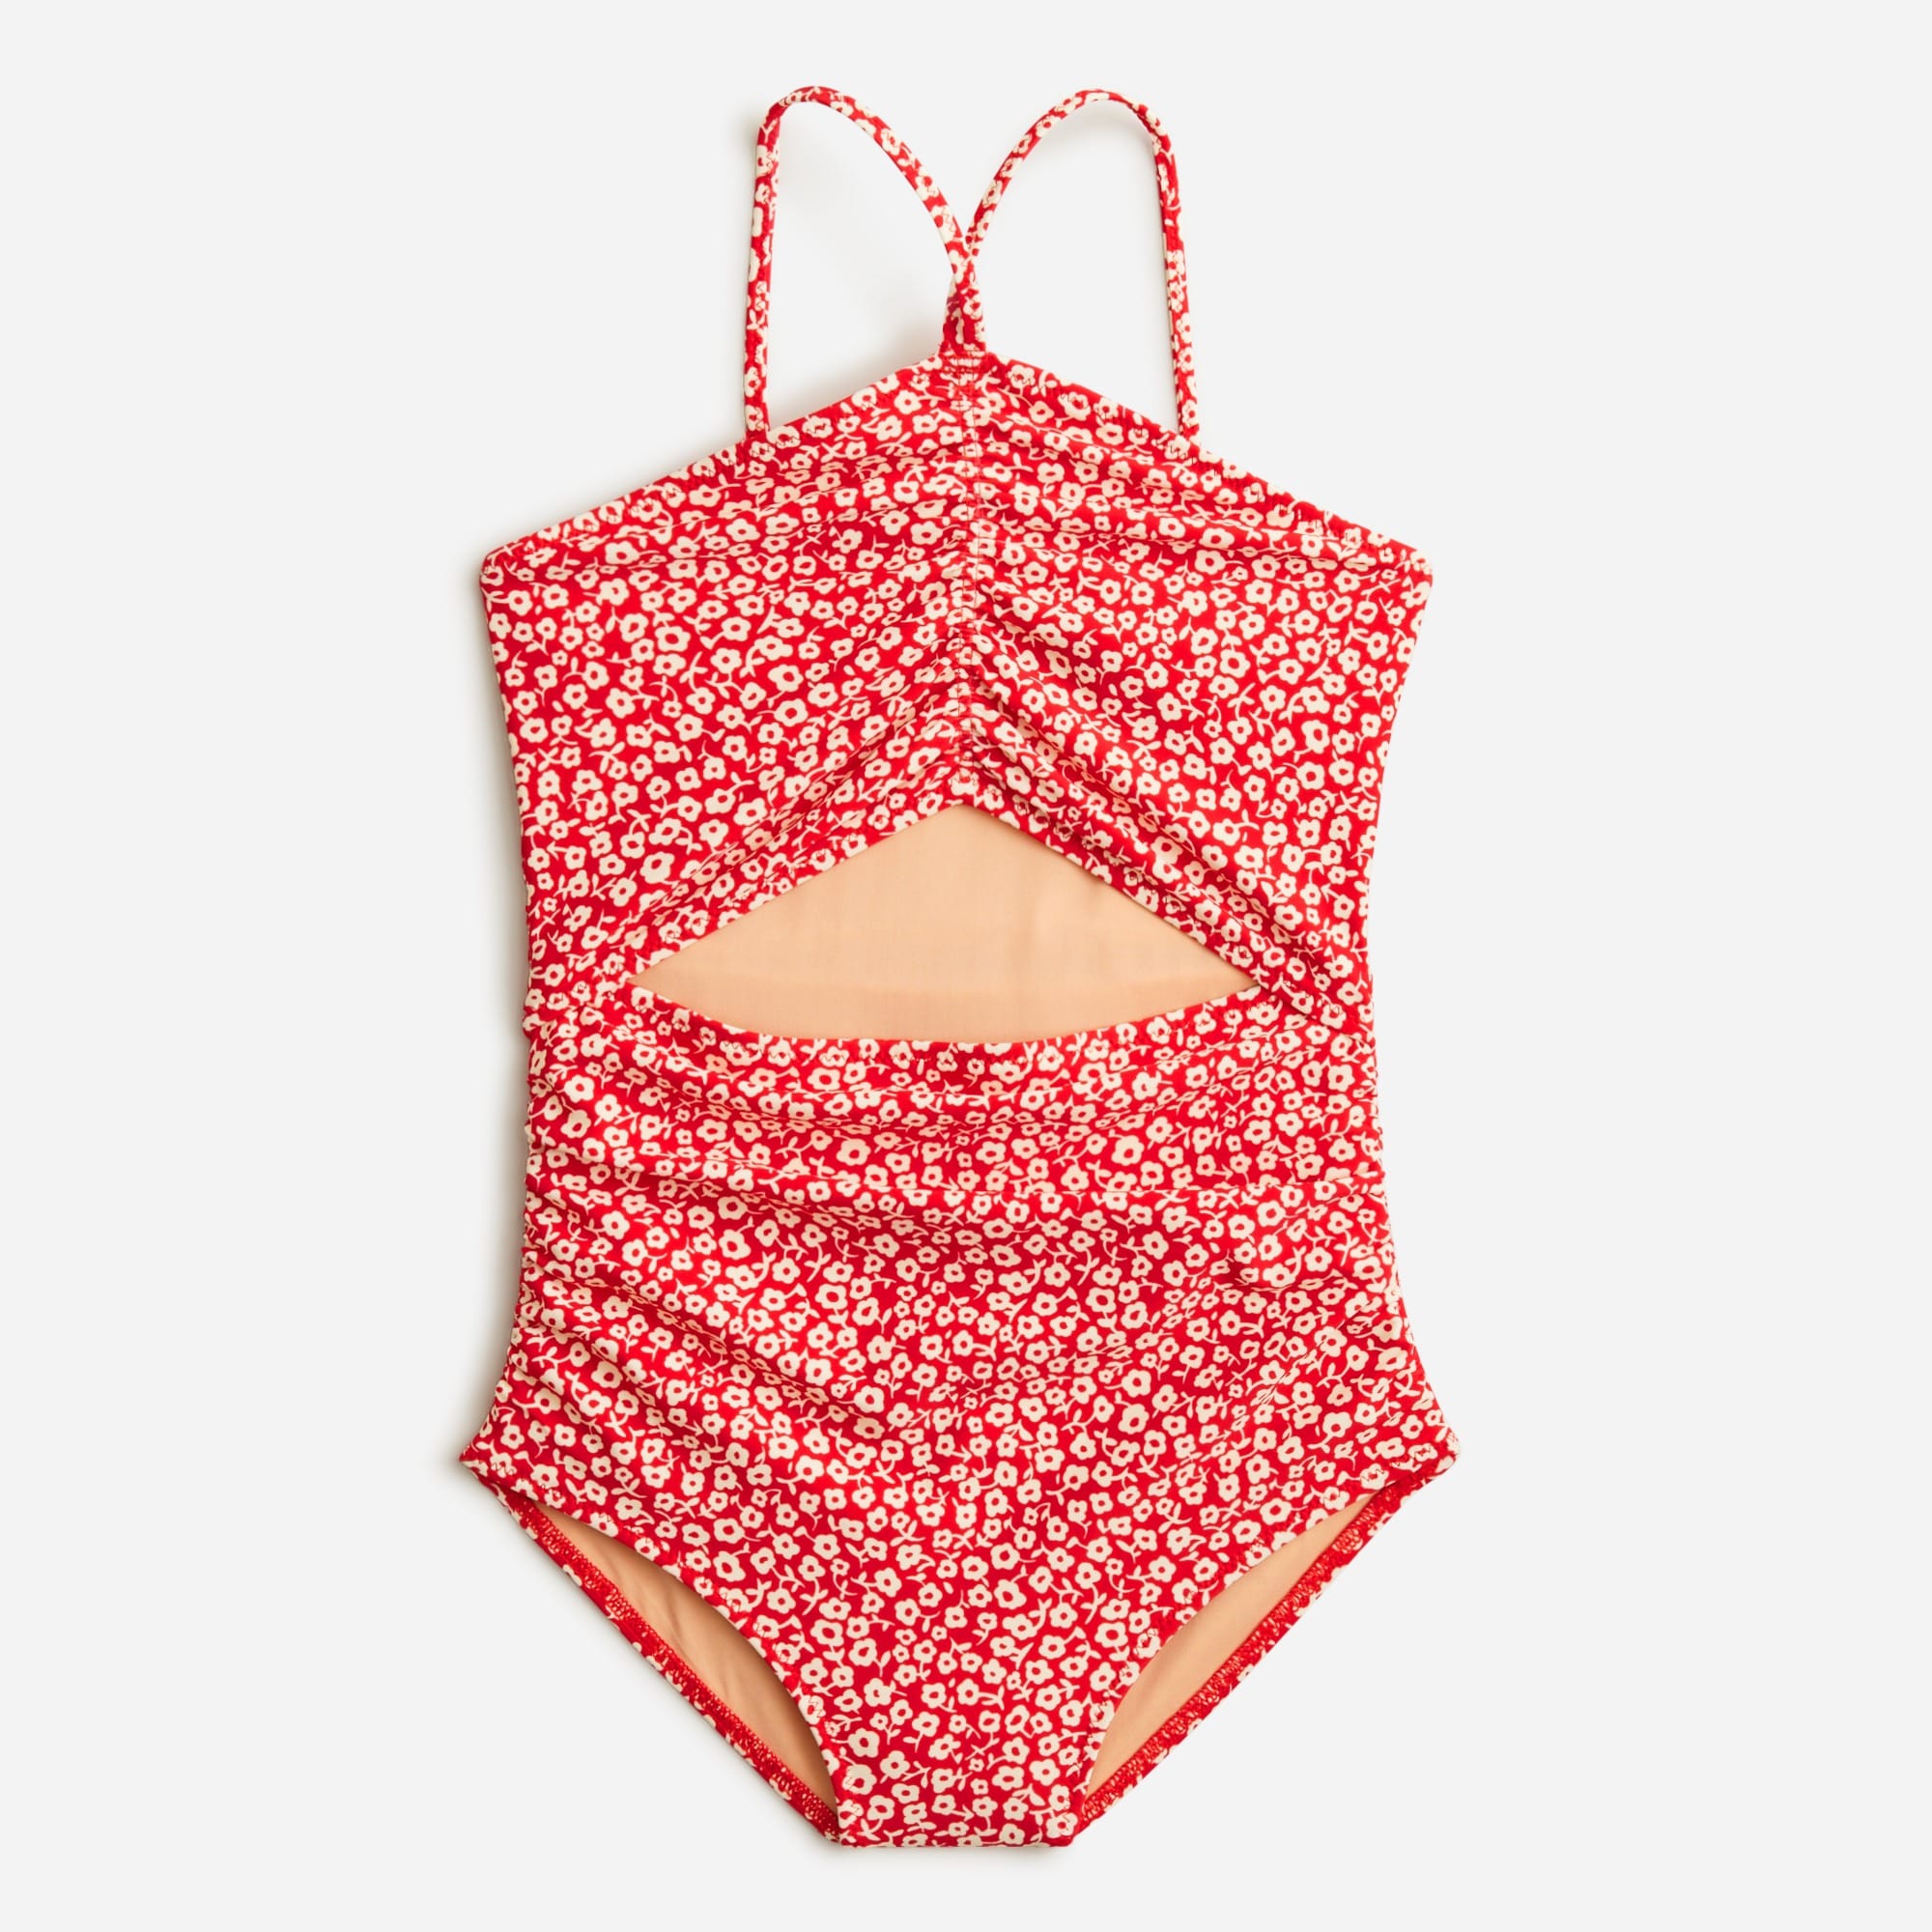 Jcrew Girls ruched one-piece swimsuit with UPF 50+